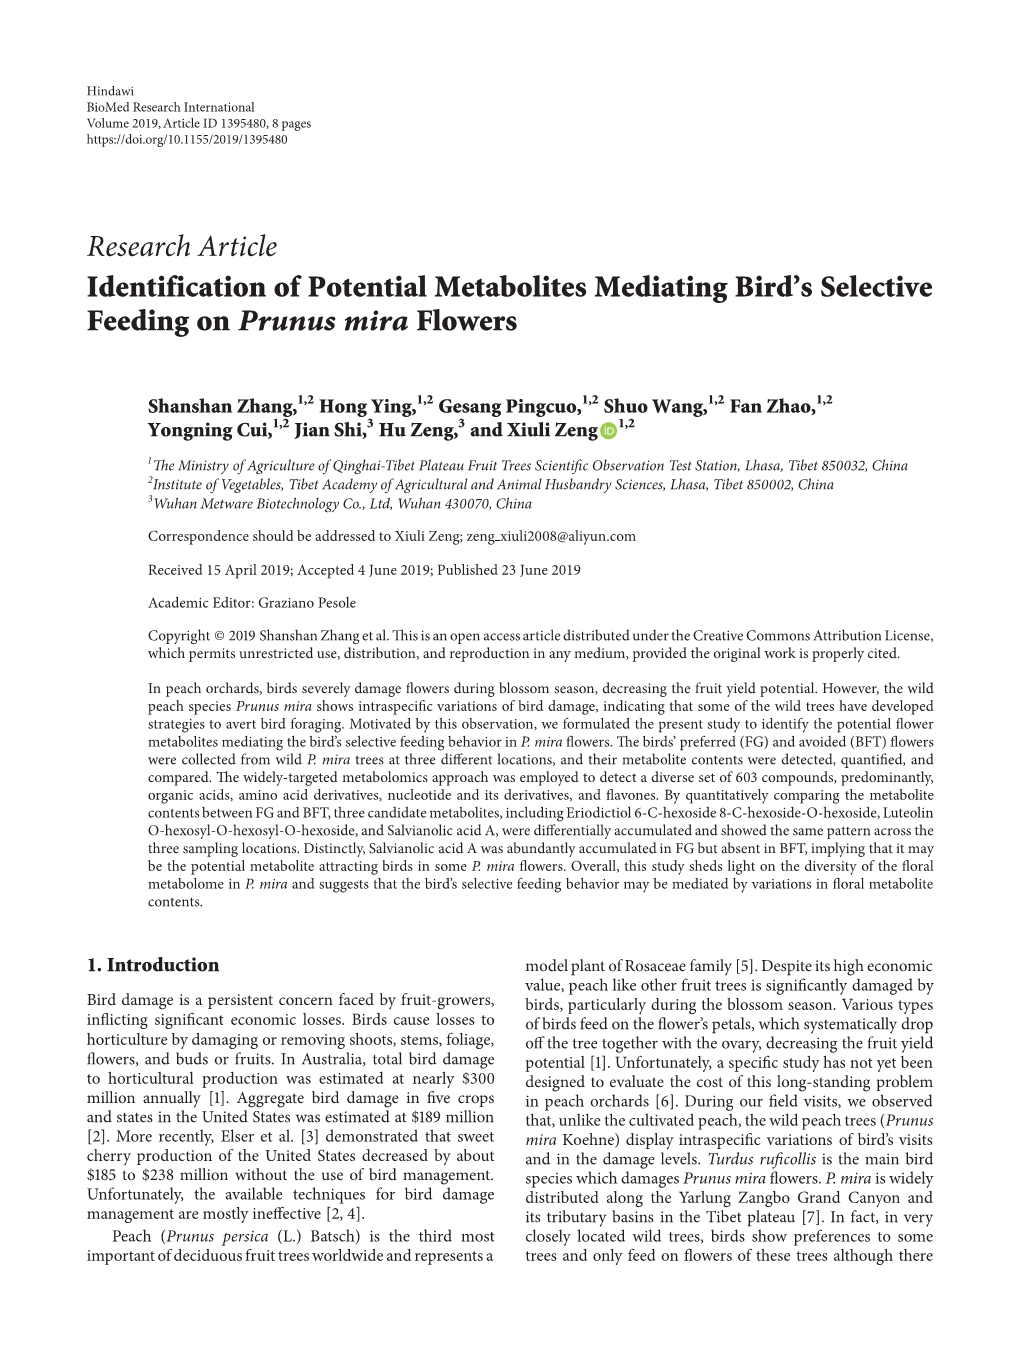 Research Article Identification of Potential Metabolites Mediating Bird’S Selective Feeding on Prunus Mira Flowers